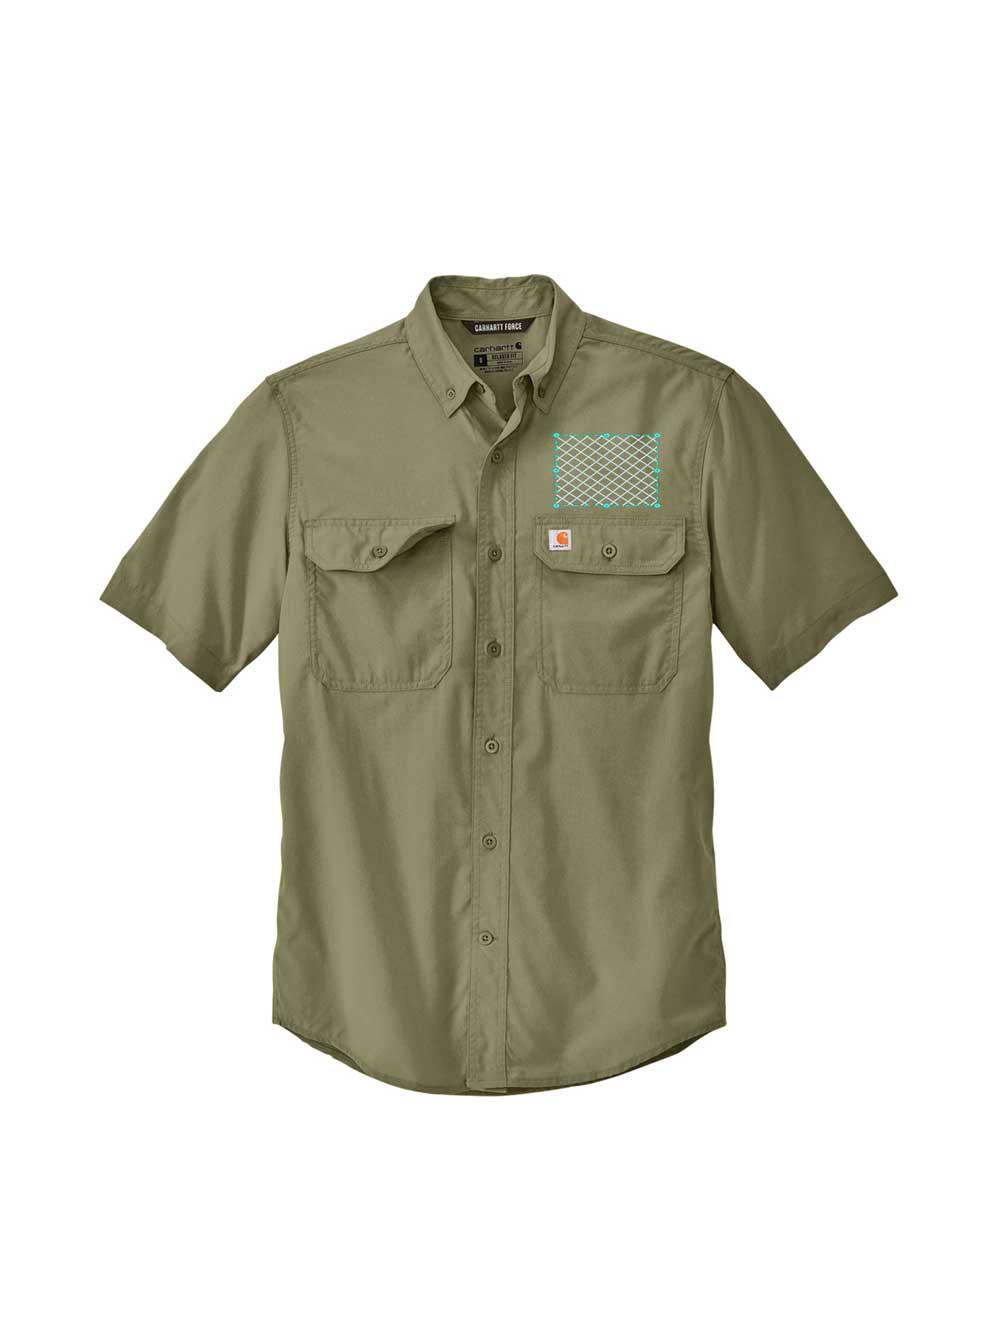 Embroidered Carhartt Force® Solid Short Sleeve Shirt - Constantly Create Shop